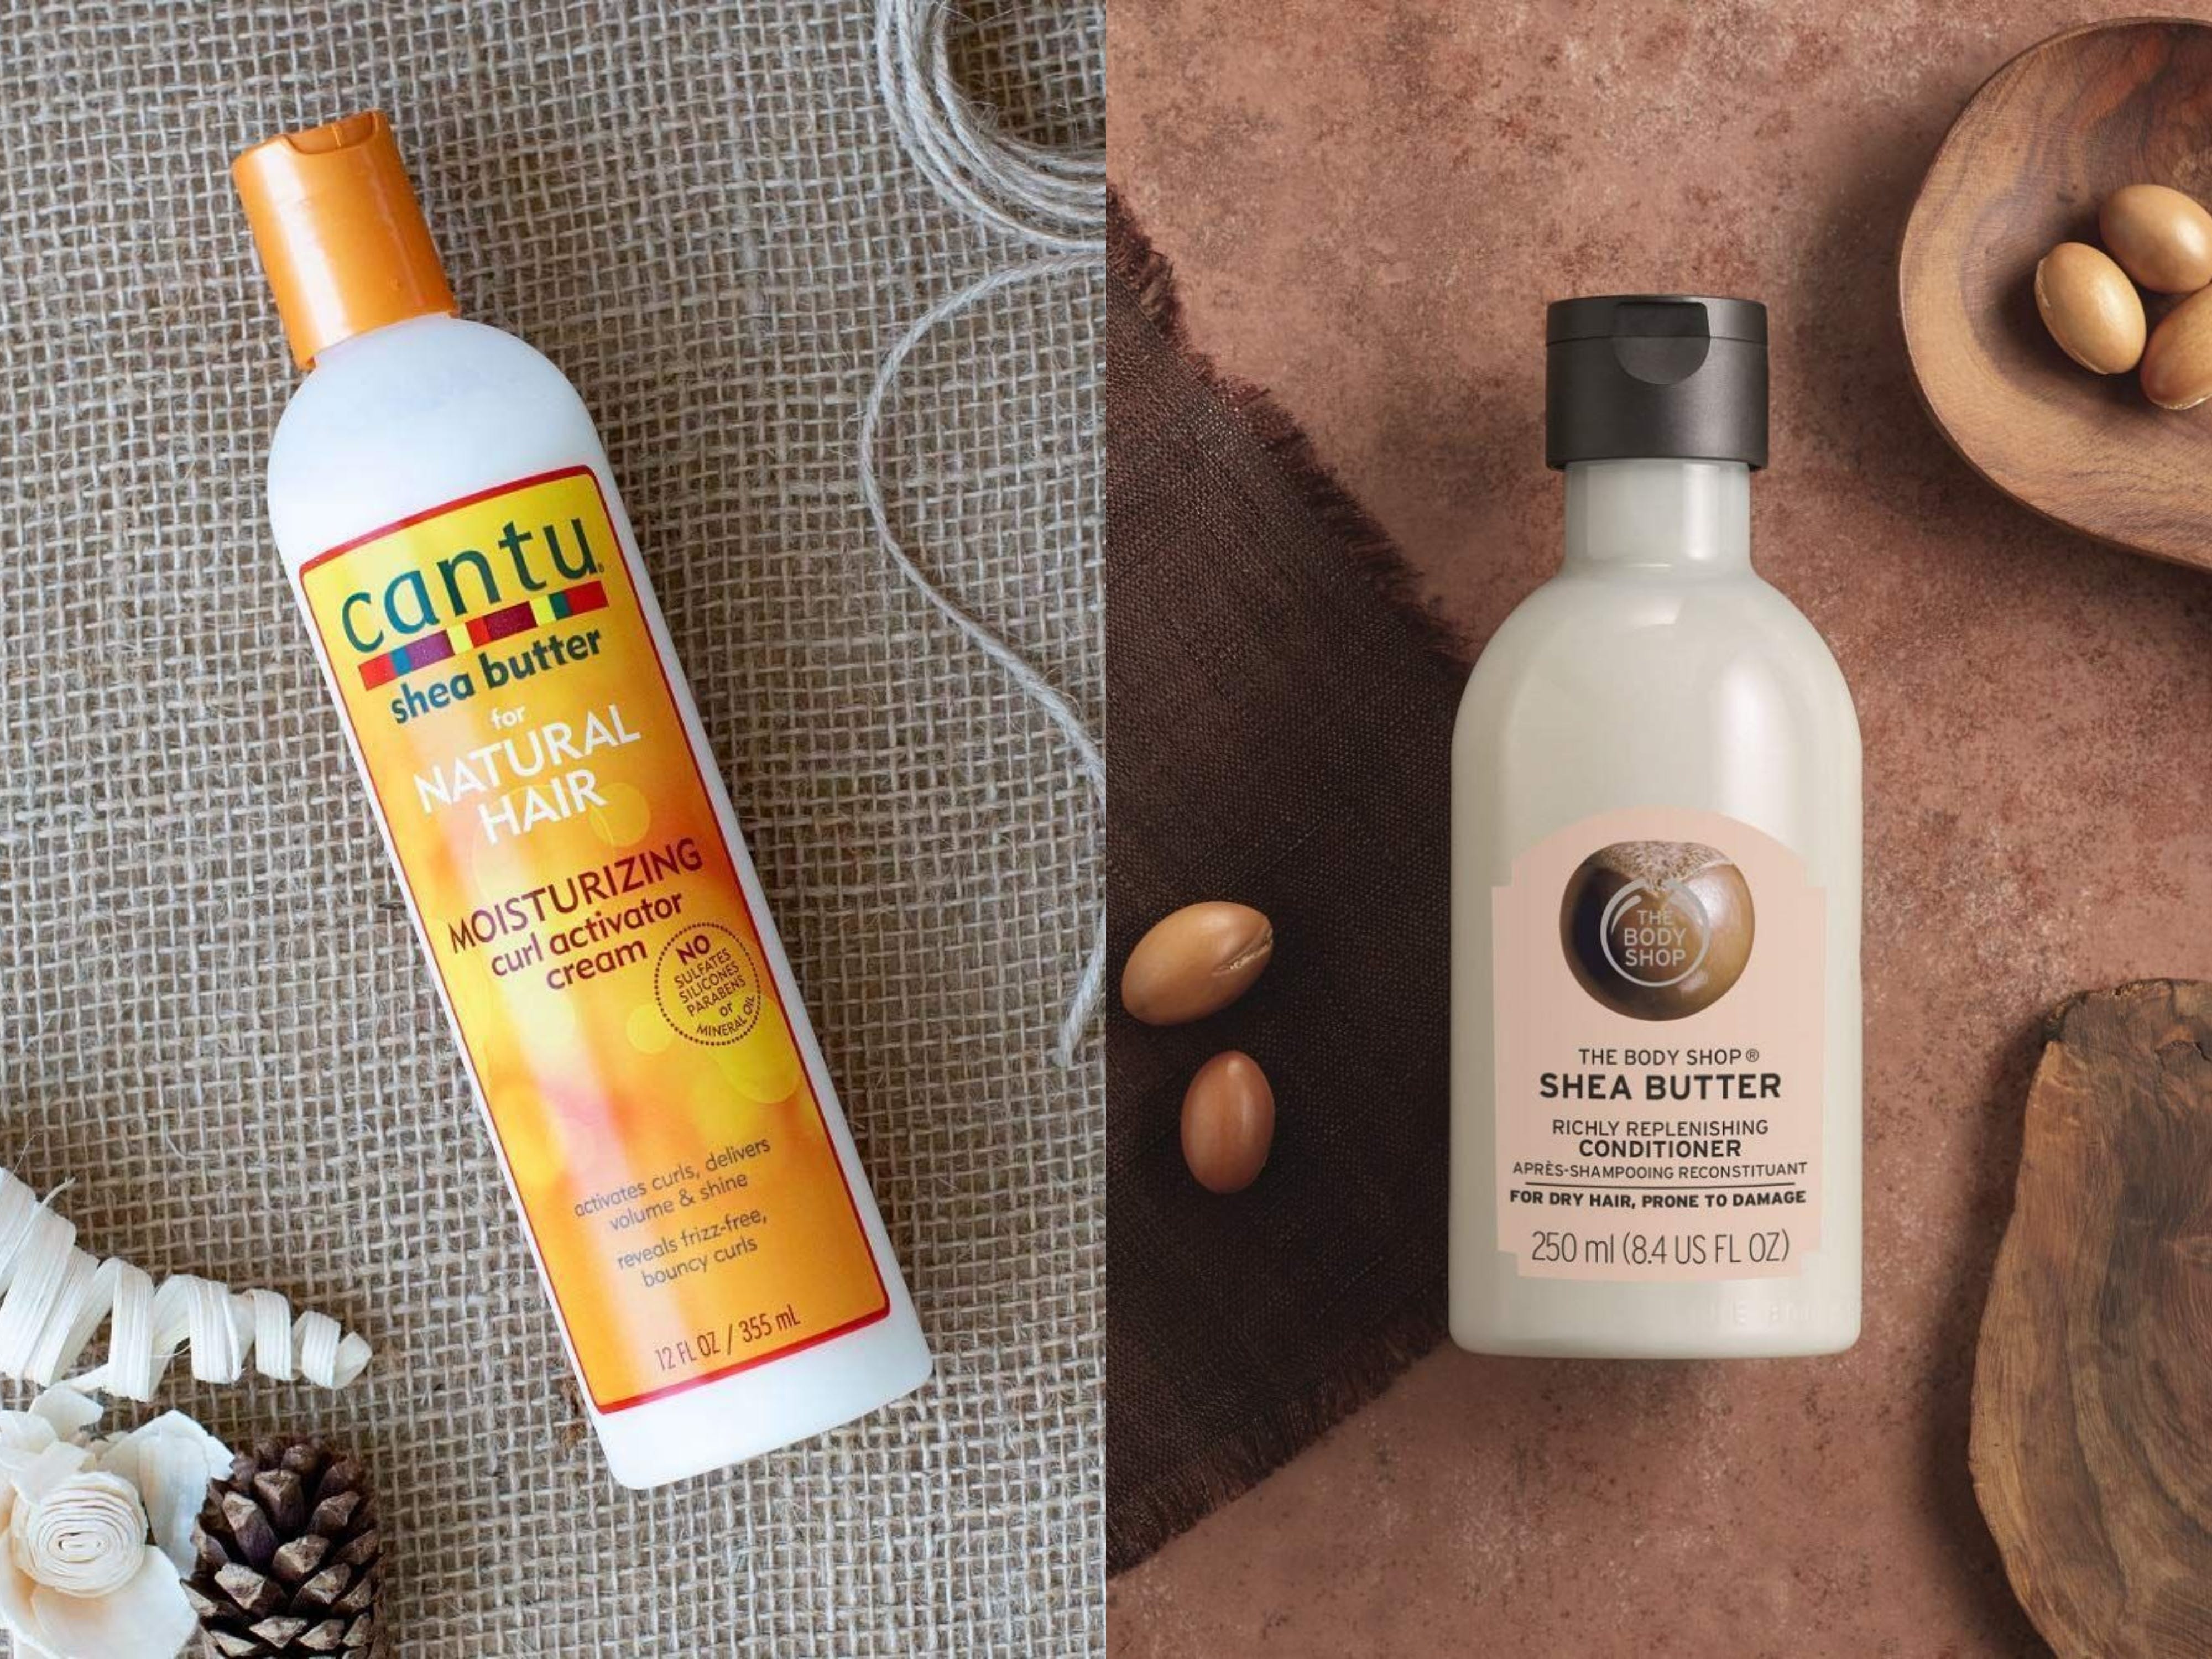 Best Target Hair Products For Curly Hair - Curly Hair Style